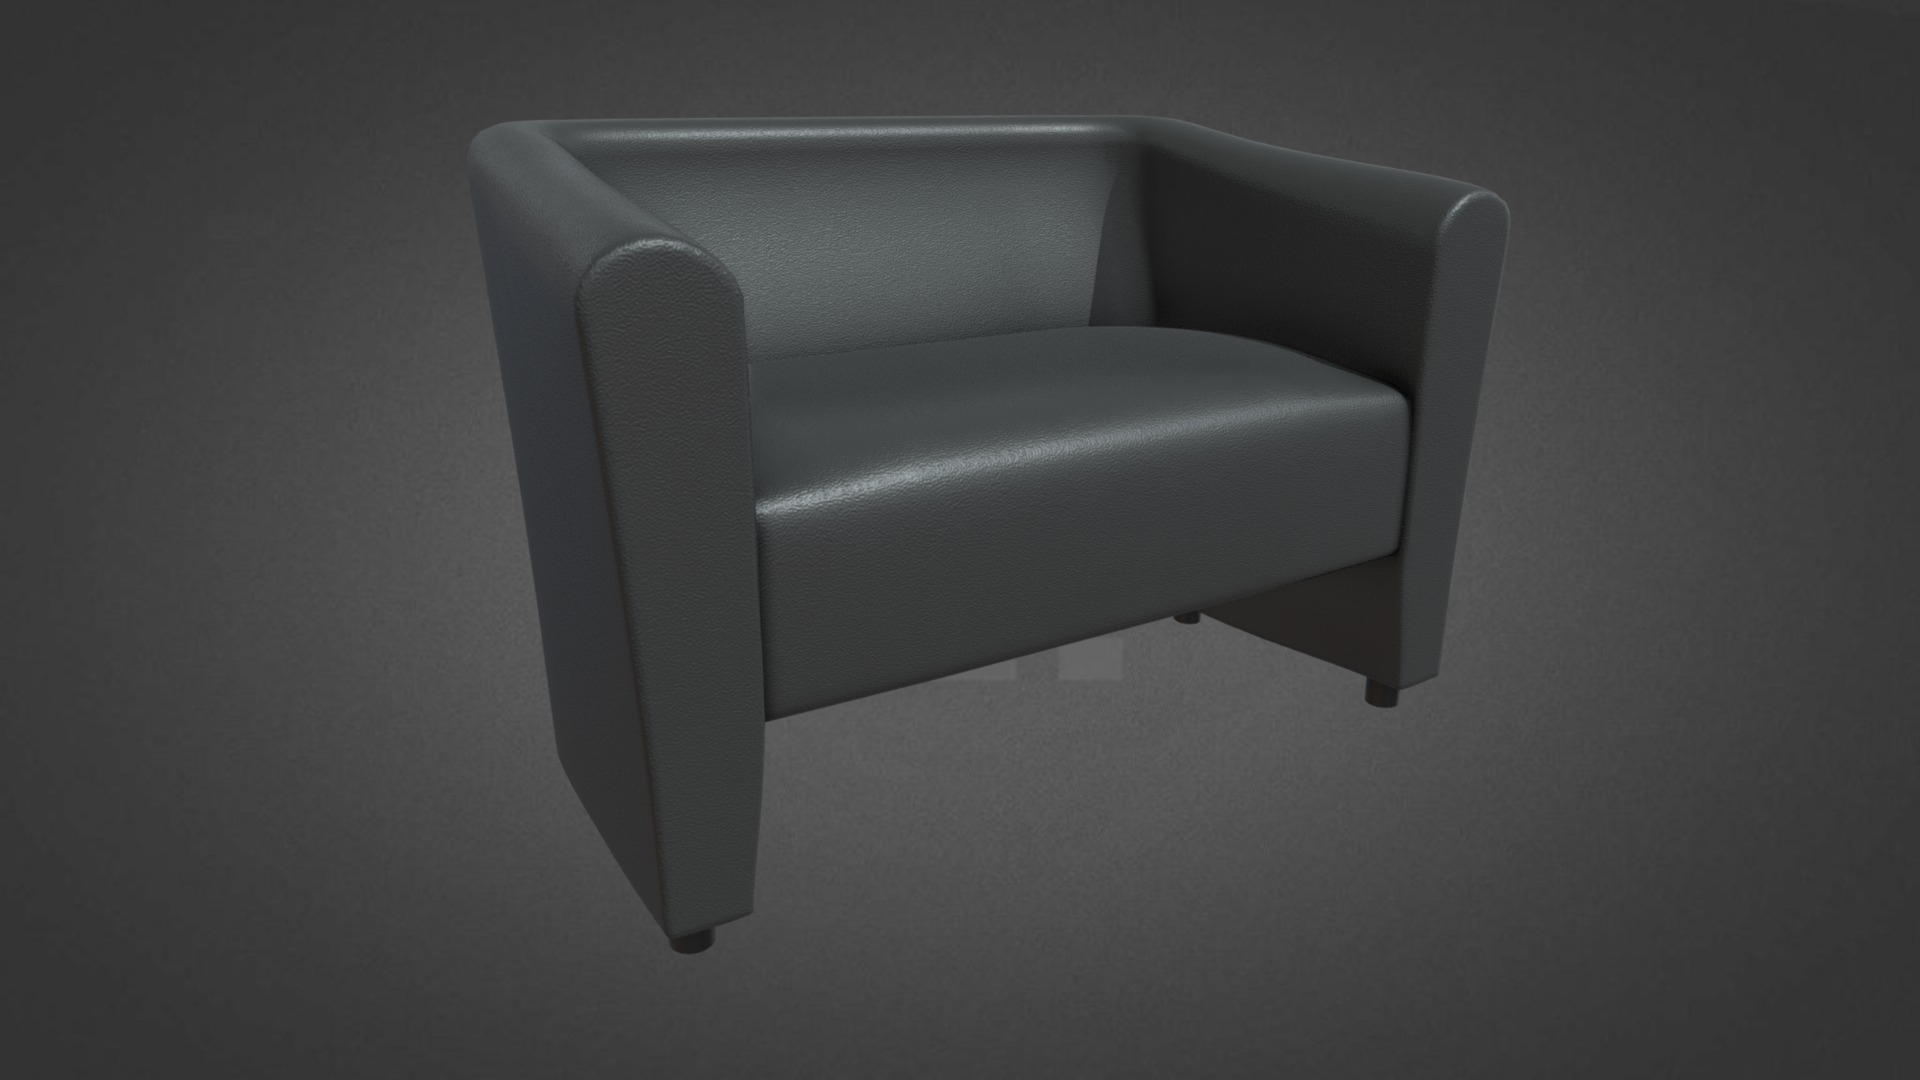 3D model Leather JoJo Sofa Hire - This is a 3D model of the Leather JoJo Sofa Hire. The 3D model is about a grey chair with a grey background.